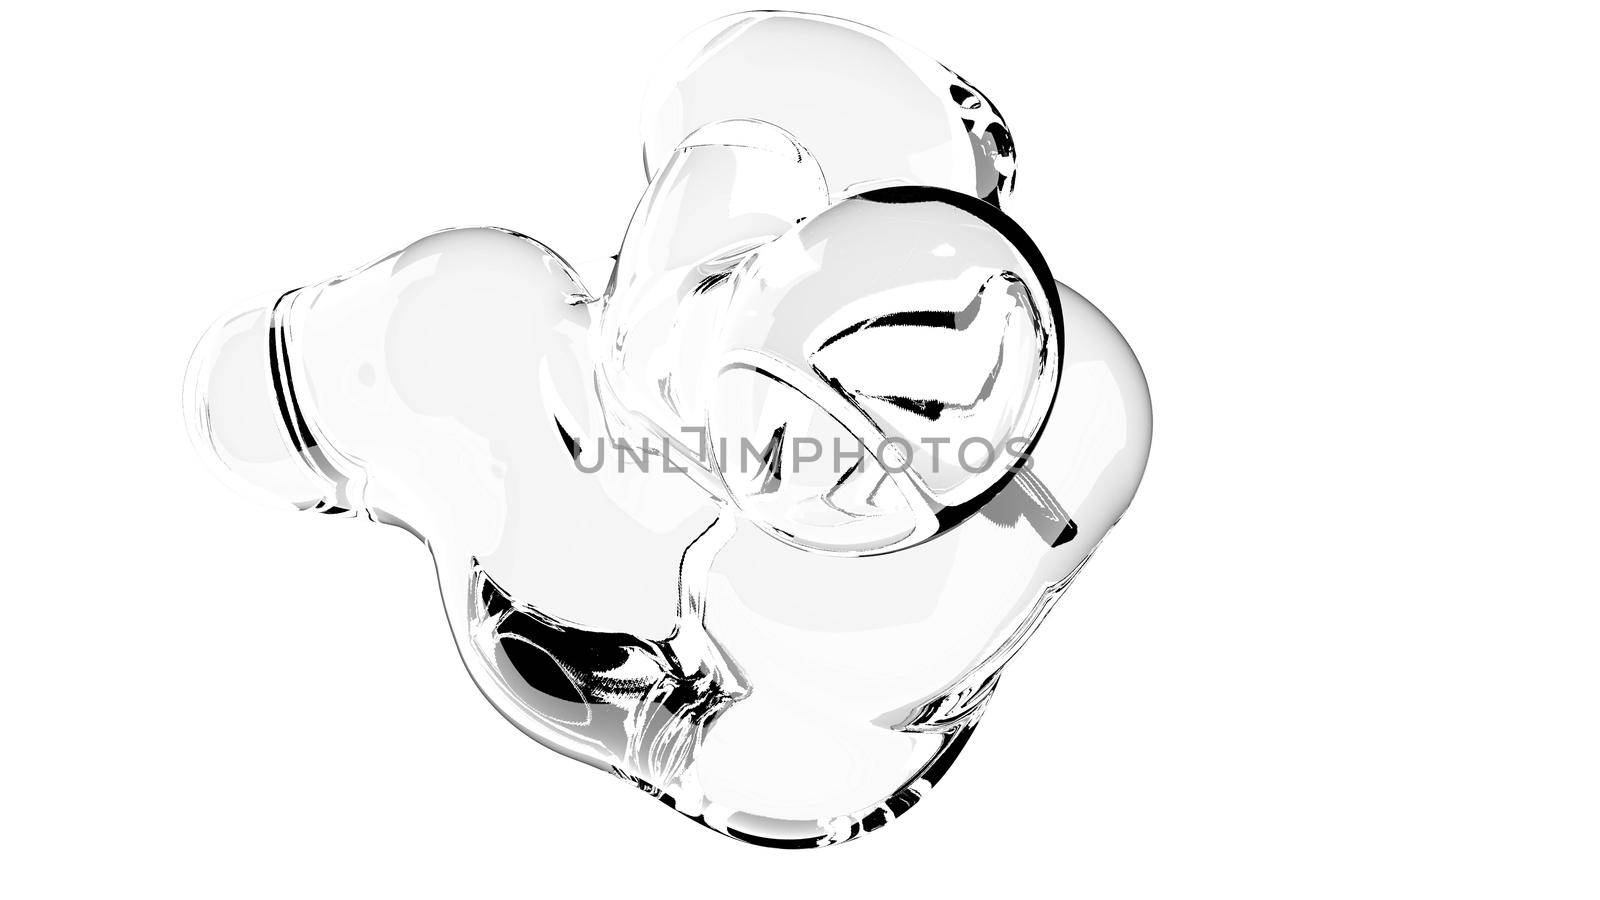 Transparent Cosmetic Sample Medical science Water bubbles Skin care 3d render by Zozulinskyi